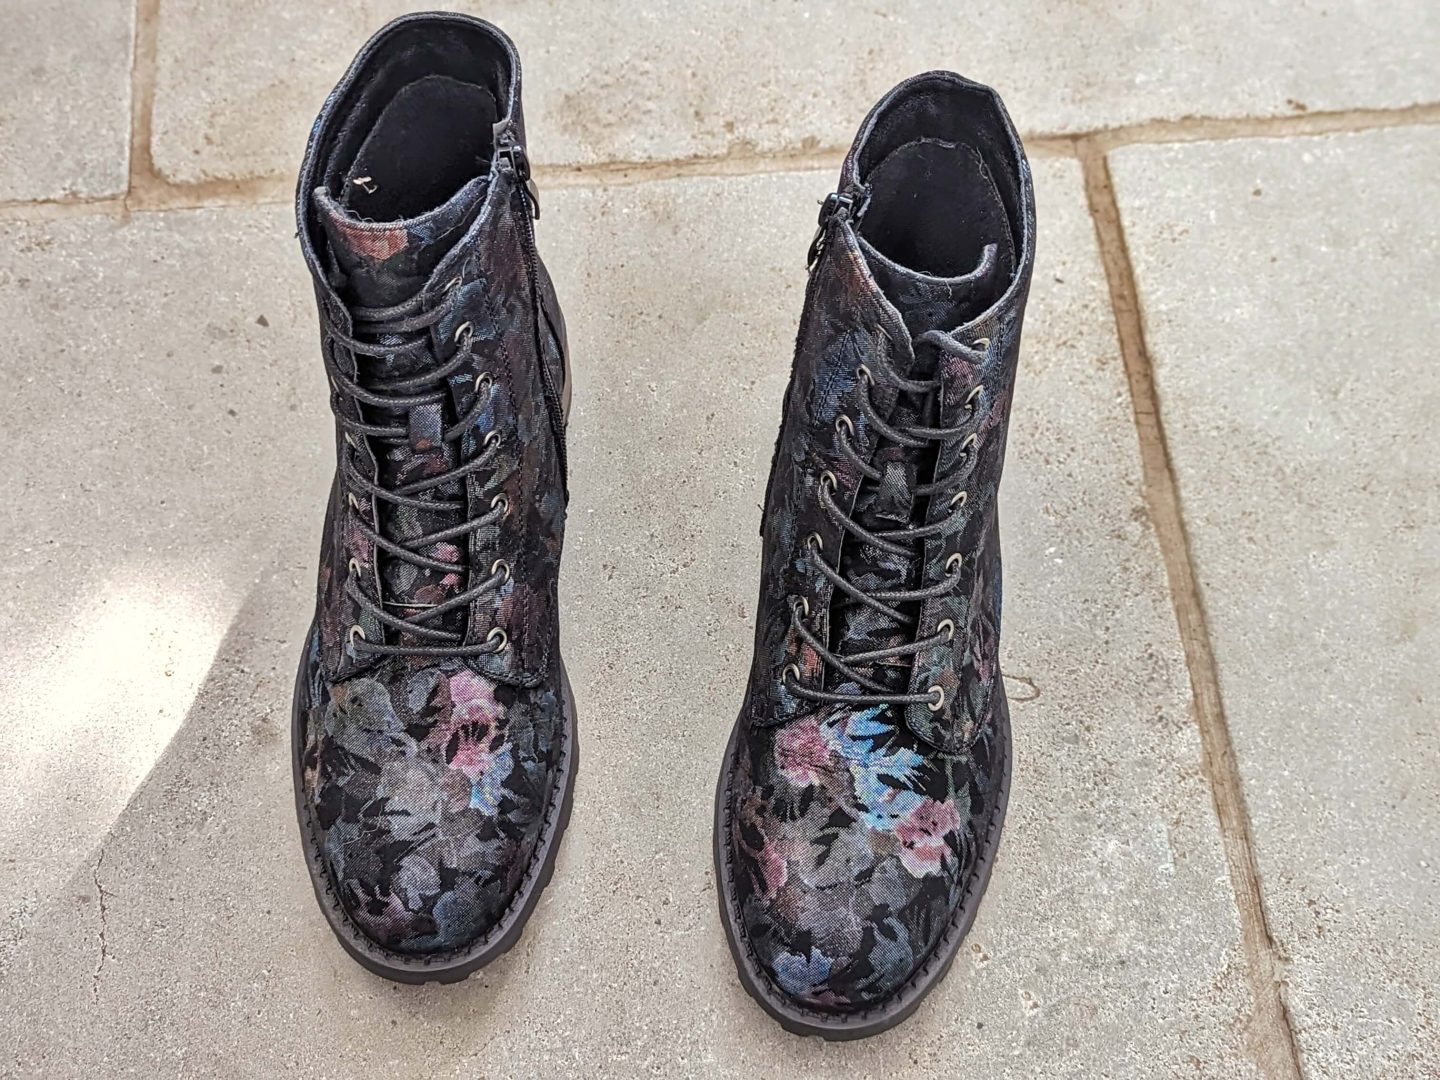 Cotton Traders floral lace-up boots on a grey tiled floor